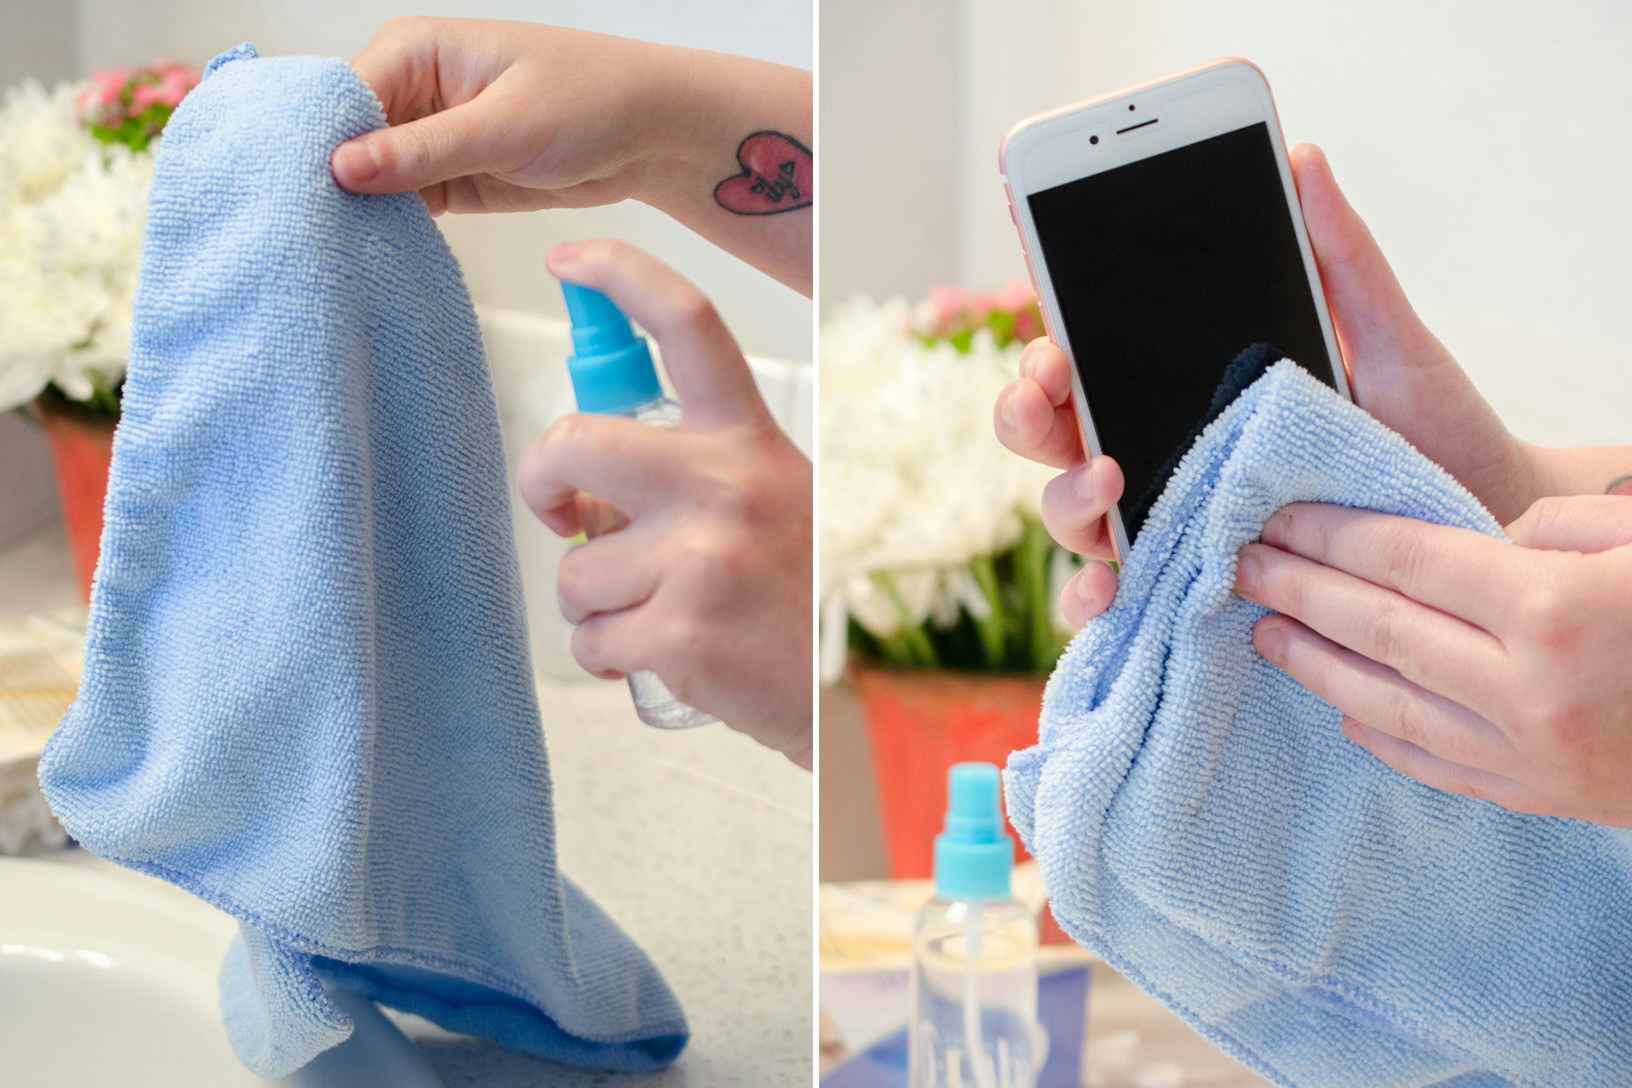 Clean your smartphone.